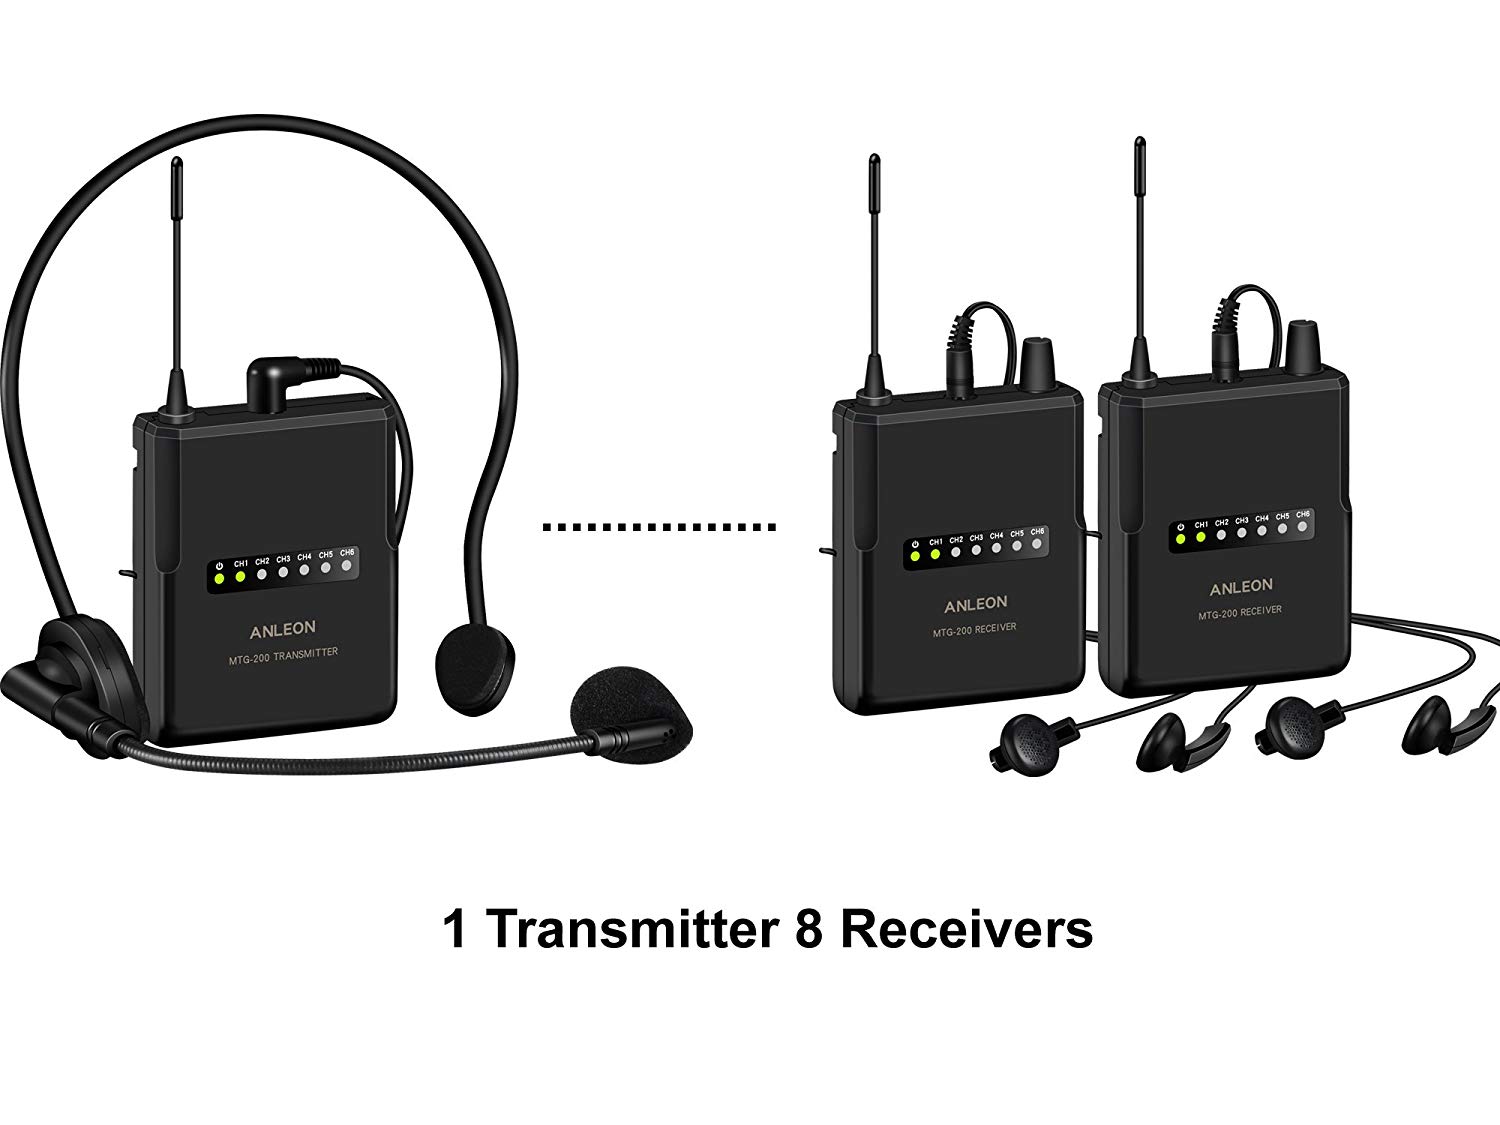 ANLEON MTG-200 wireless tour guide language translation system Translation Headsets for Factory tours,Simultaneous translation,Employee training 915Mhz (1 transmitter 8receivers)